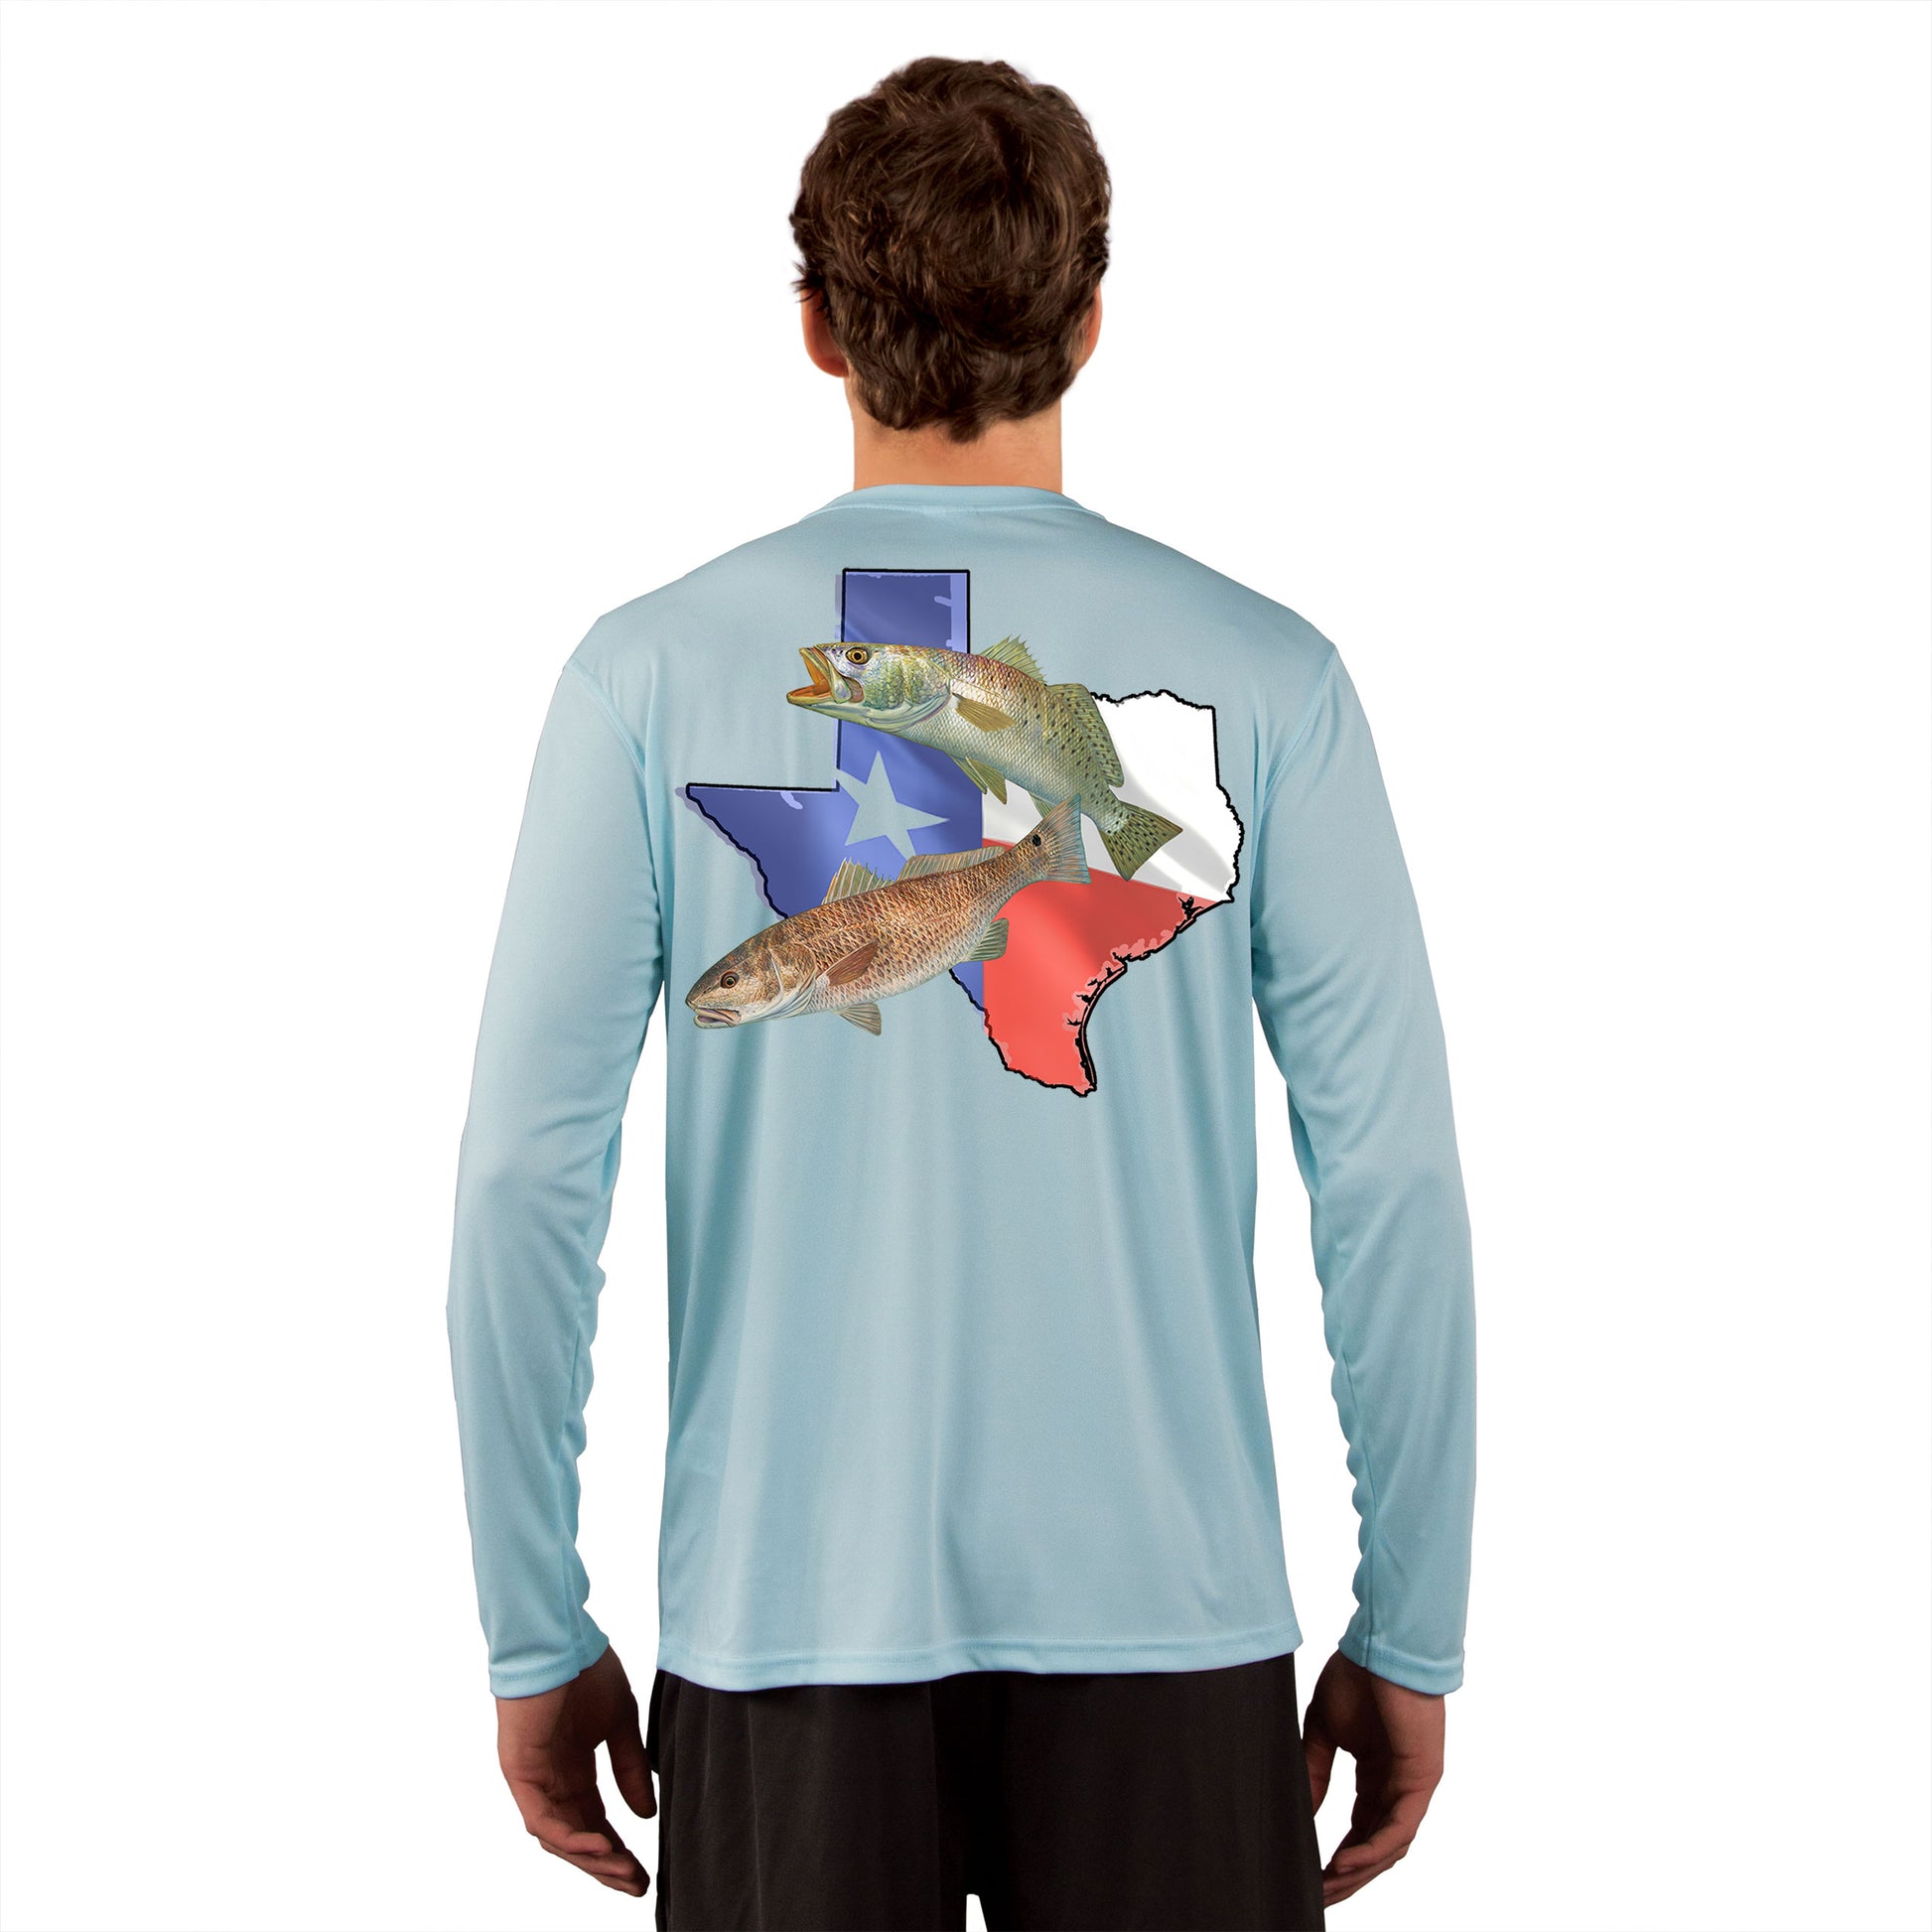 Texas State Flag Redfish & Trout Fishing Shirt with Optional Flag Slee –  Skiff Life